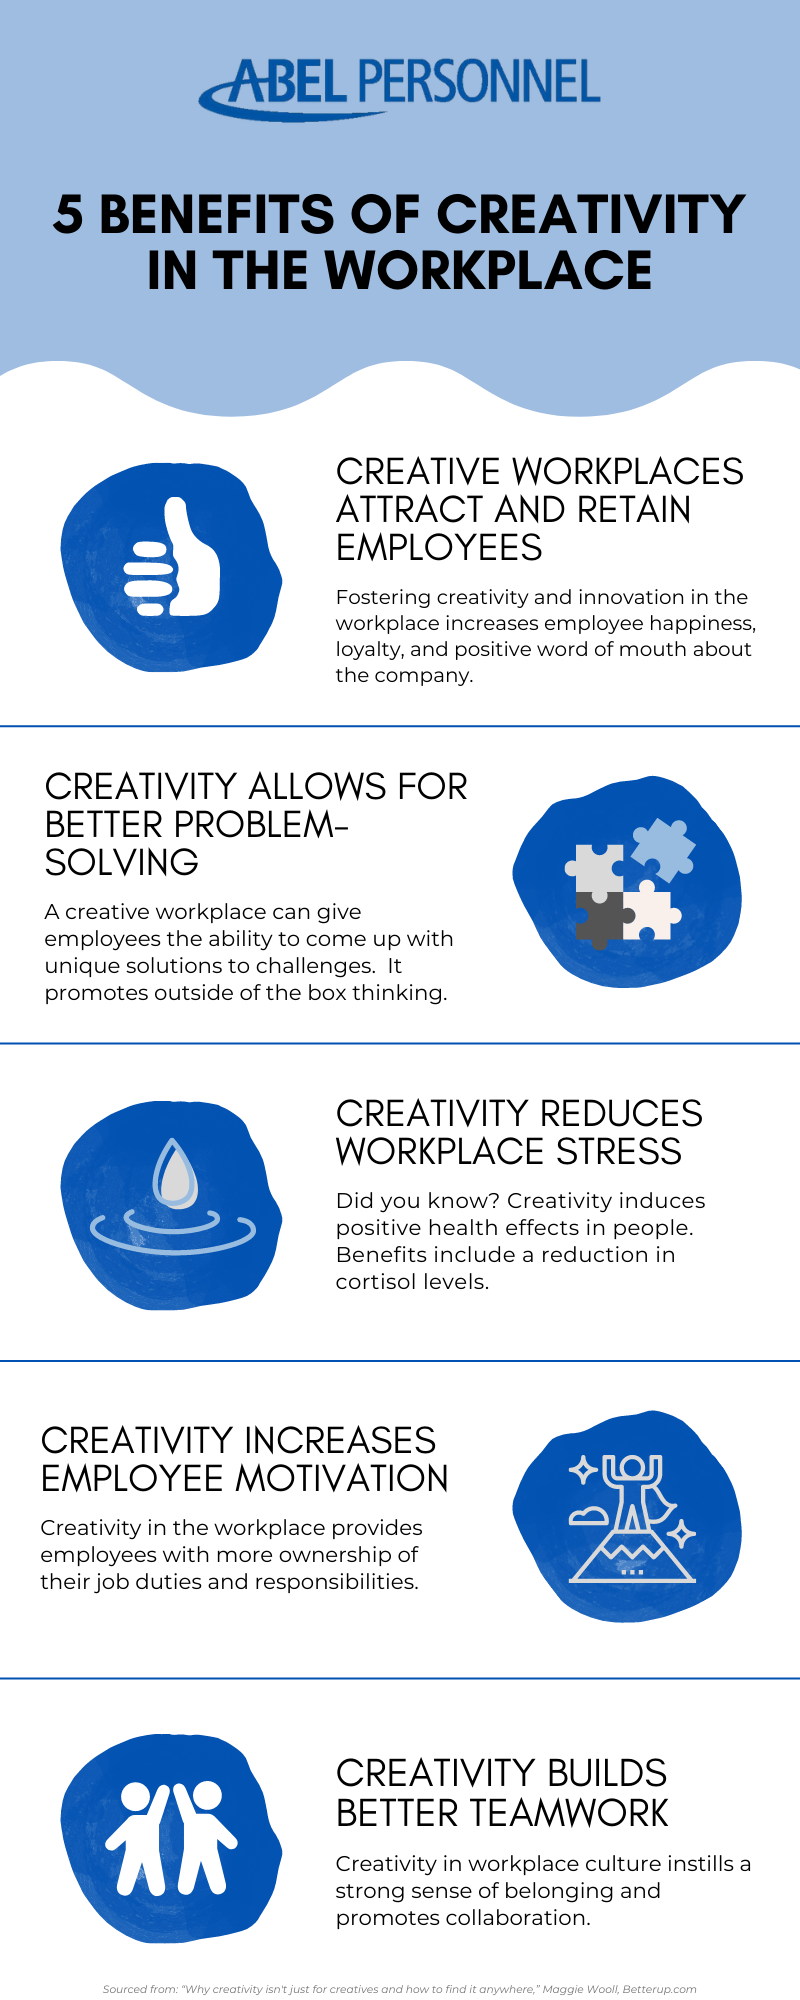 5 BENEFITS OF CREATIVITY IN THE WORKPLACE - Abel Personnel